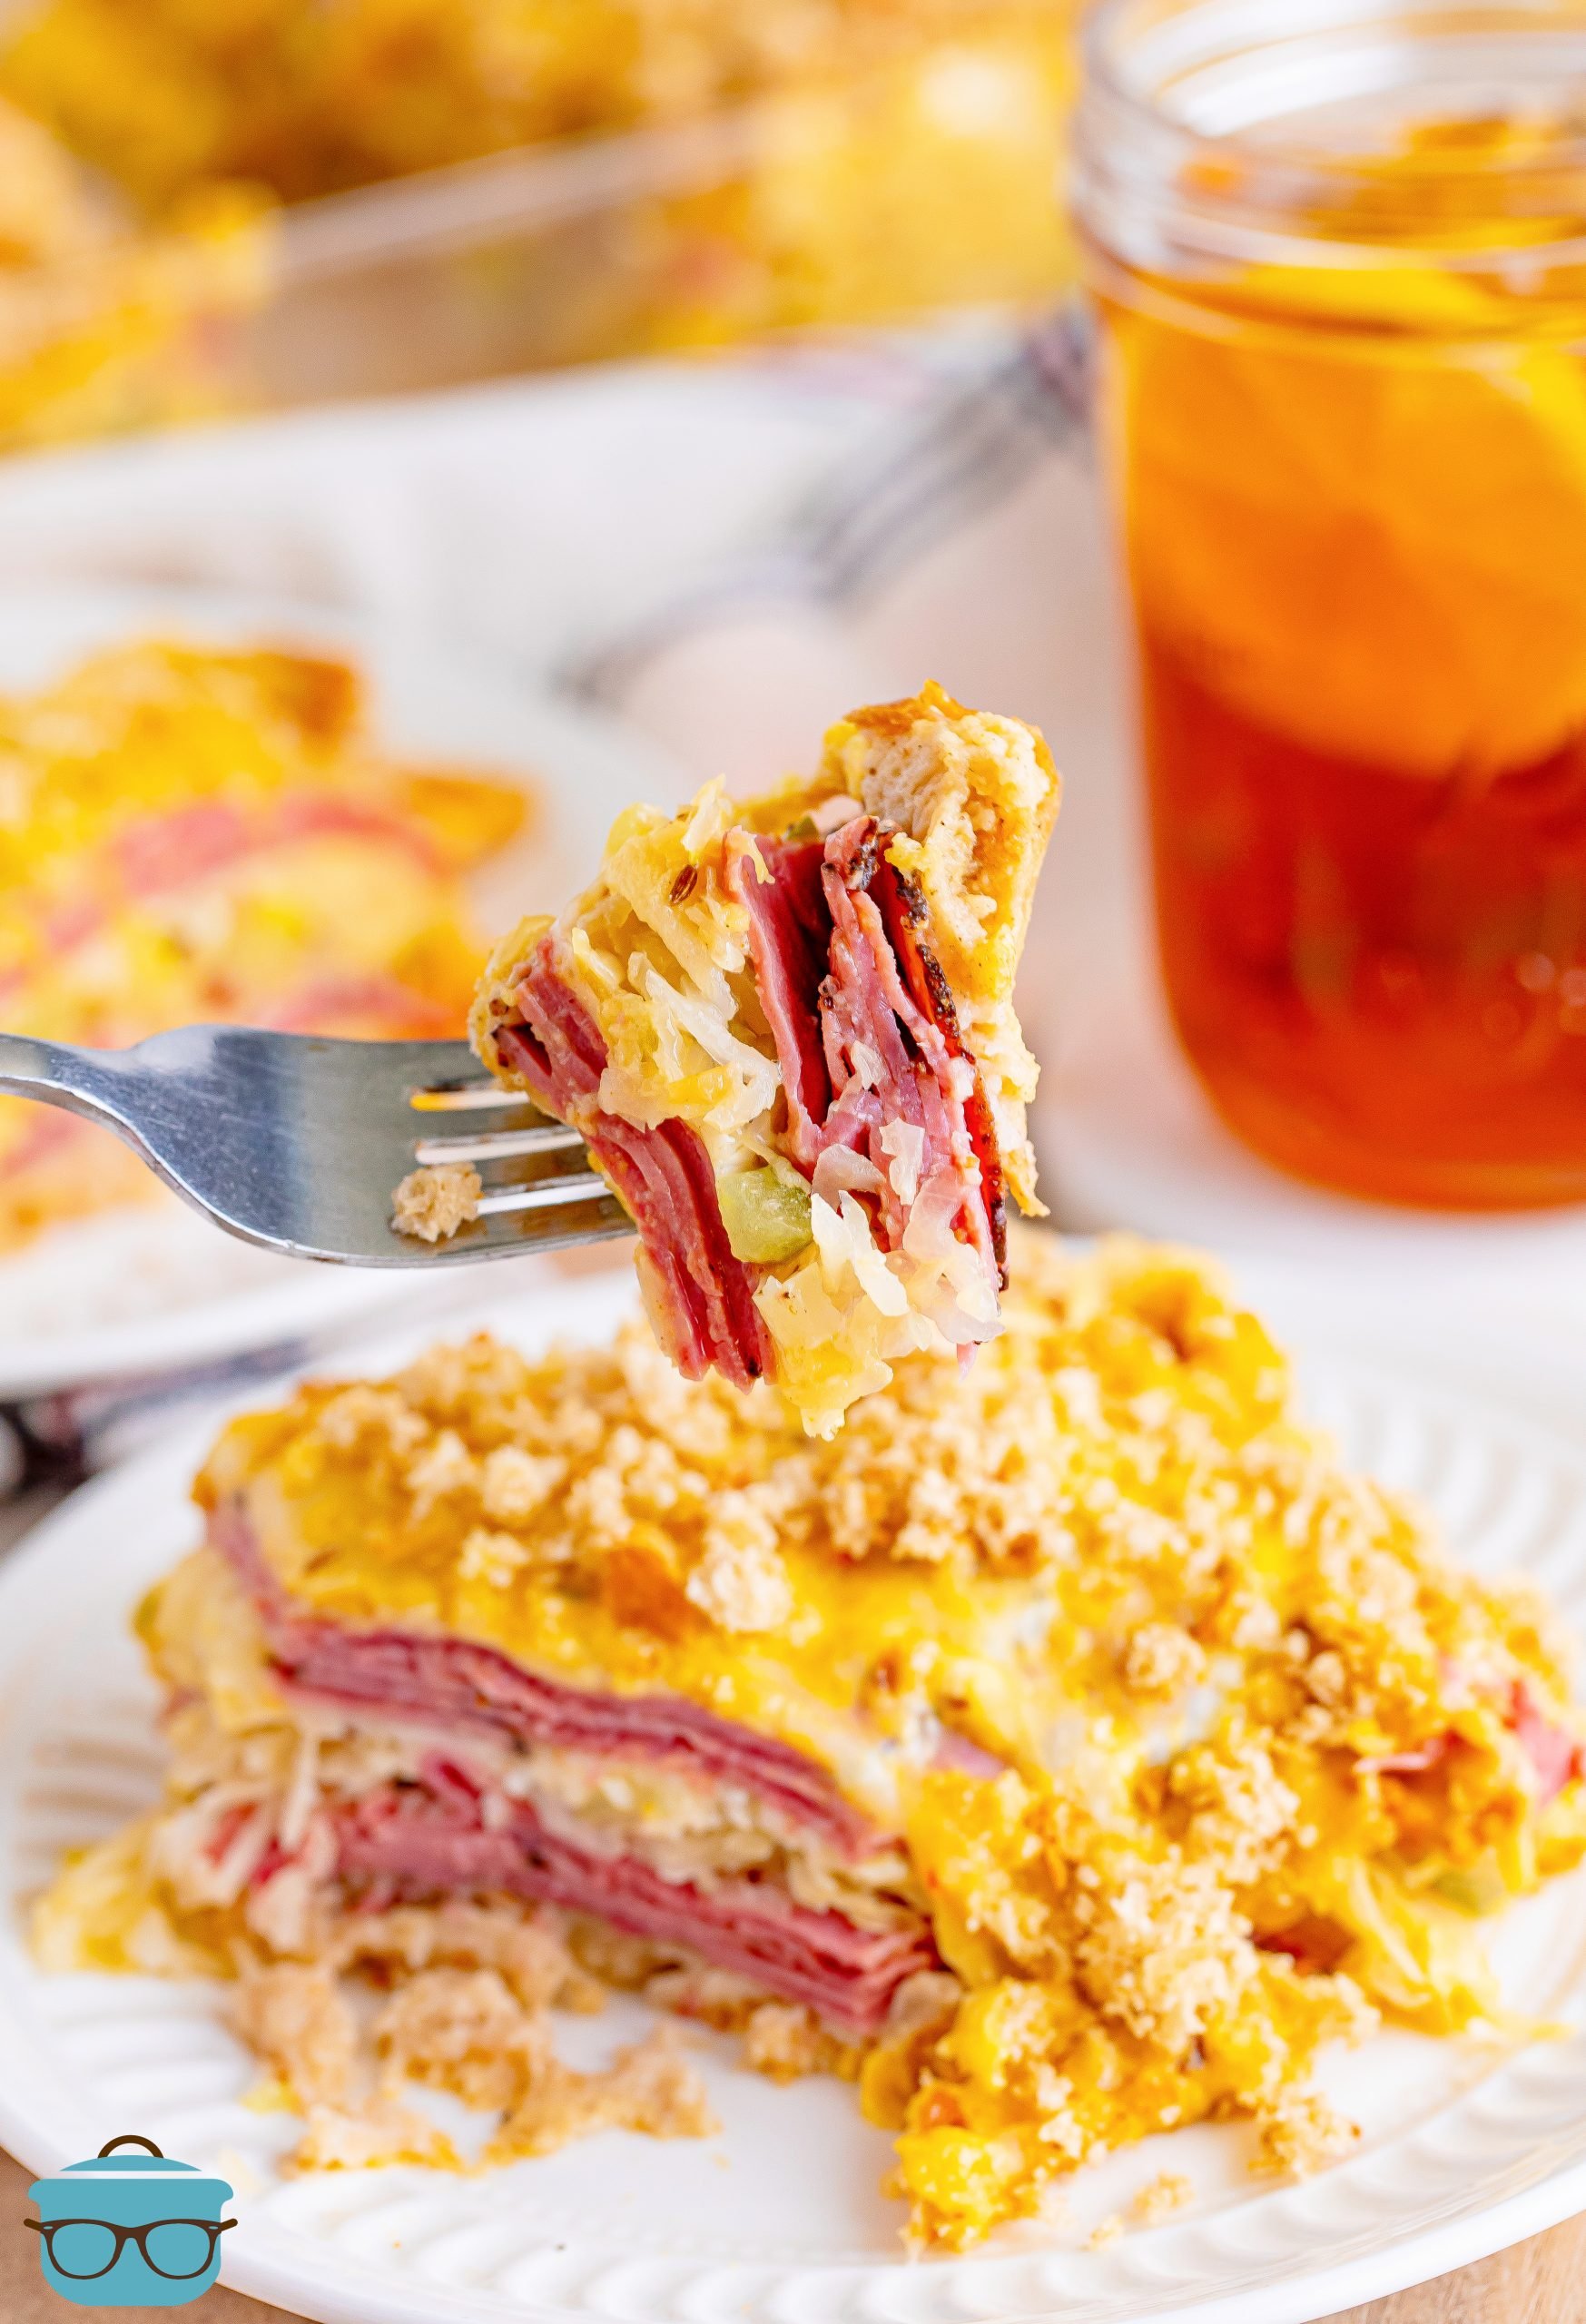 A fork holding a bite of Reuben Casserole above a plate with a serving of it.